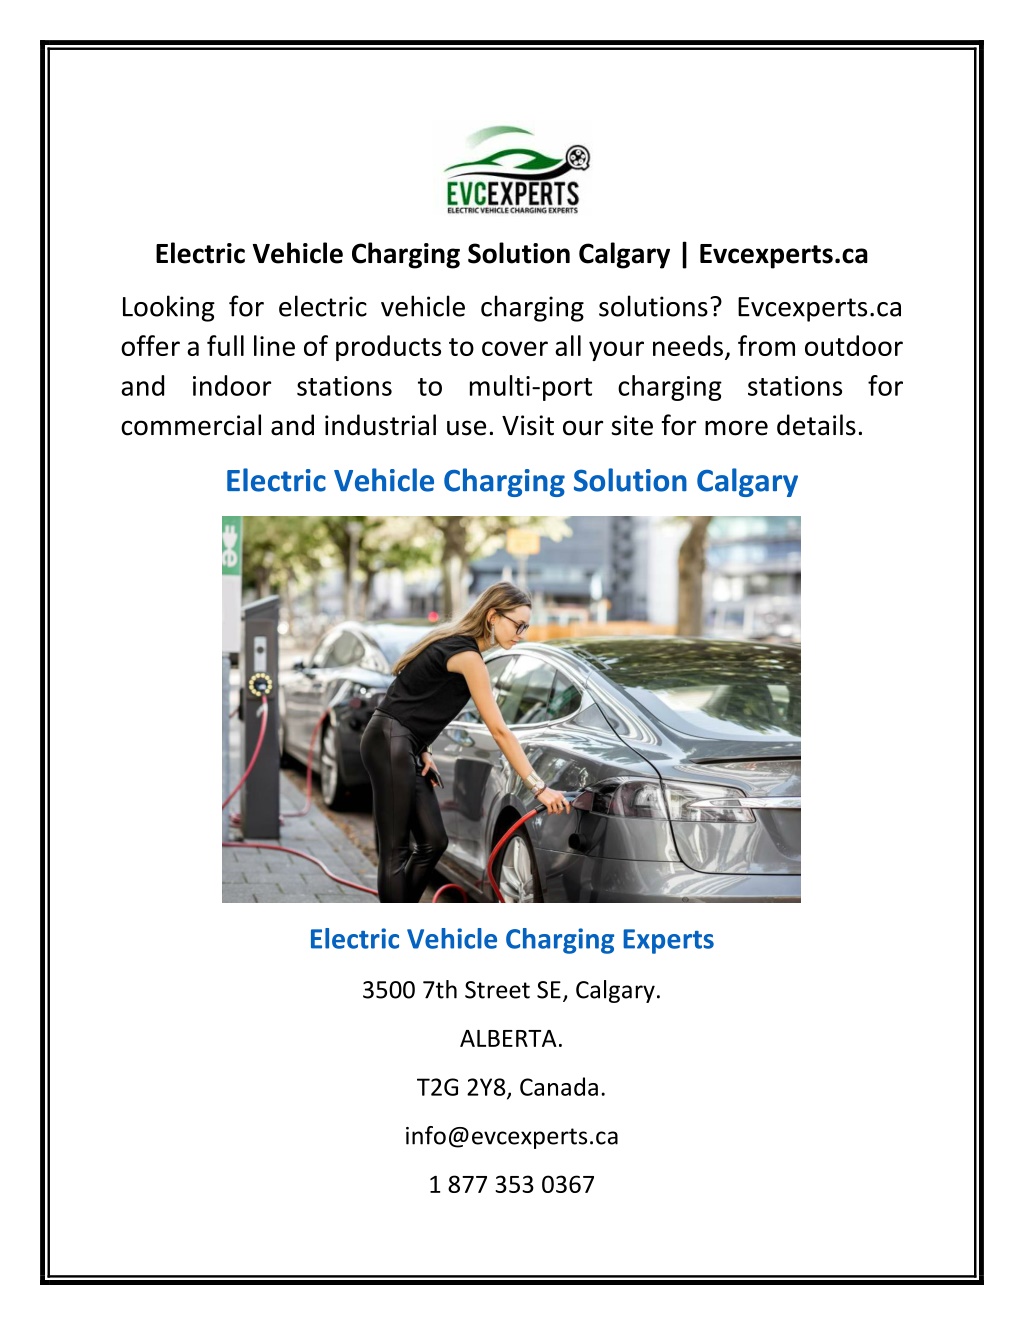 PPT Electric Vehicle Charging Solution Calgary Evcexperts.ca